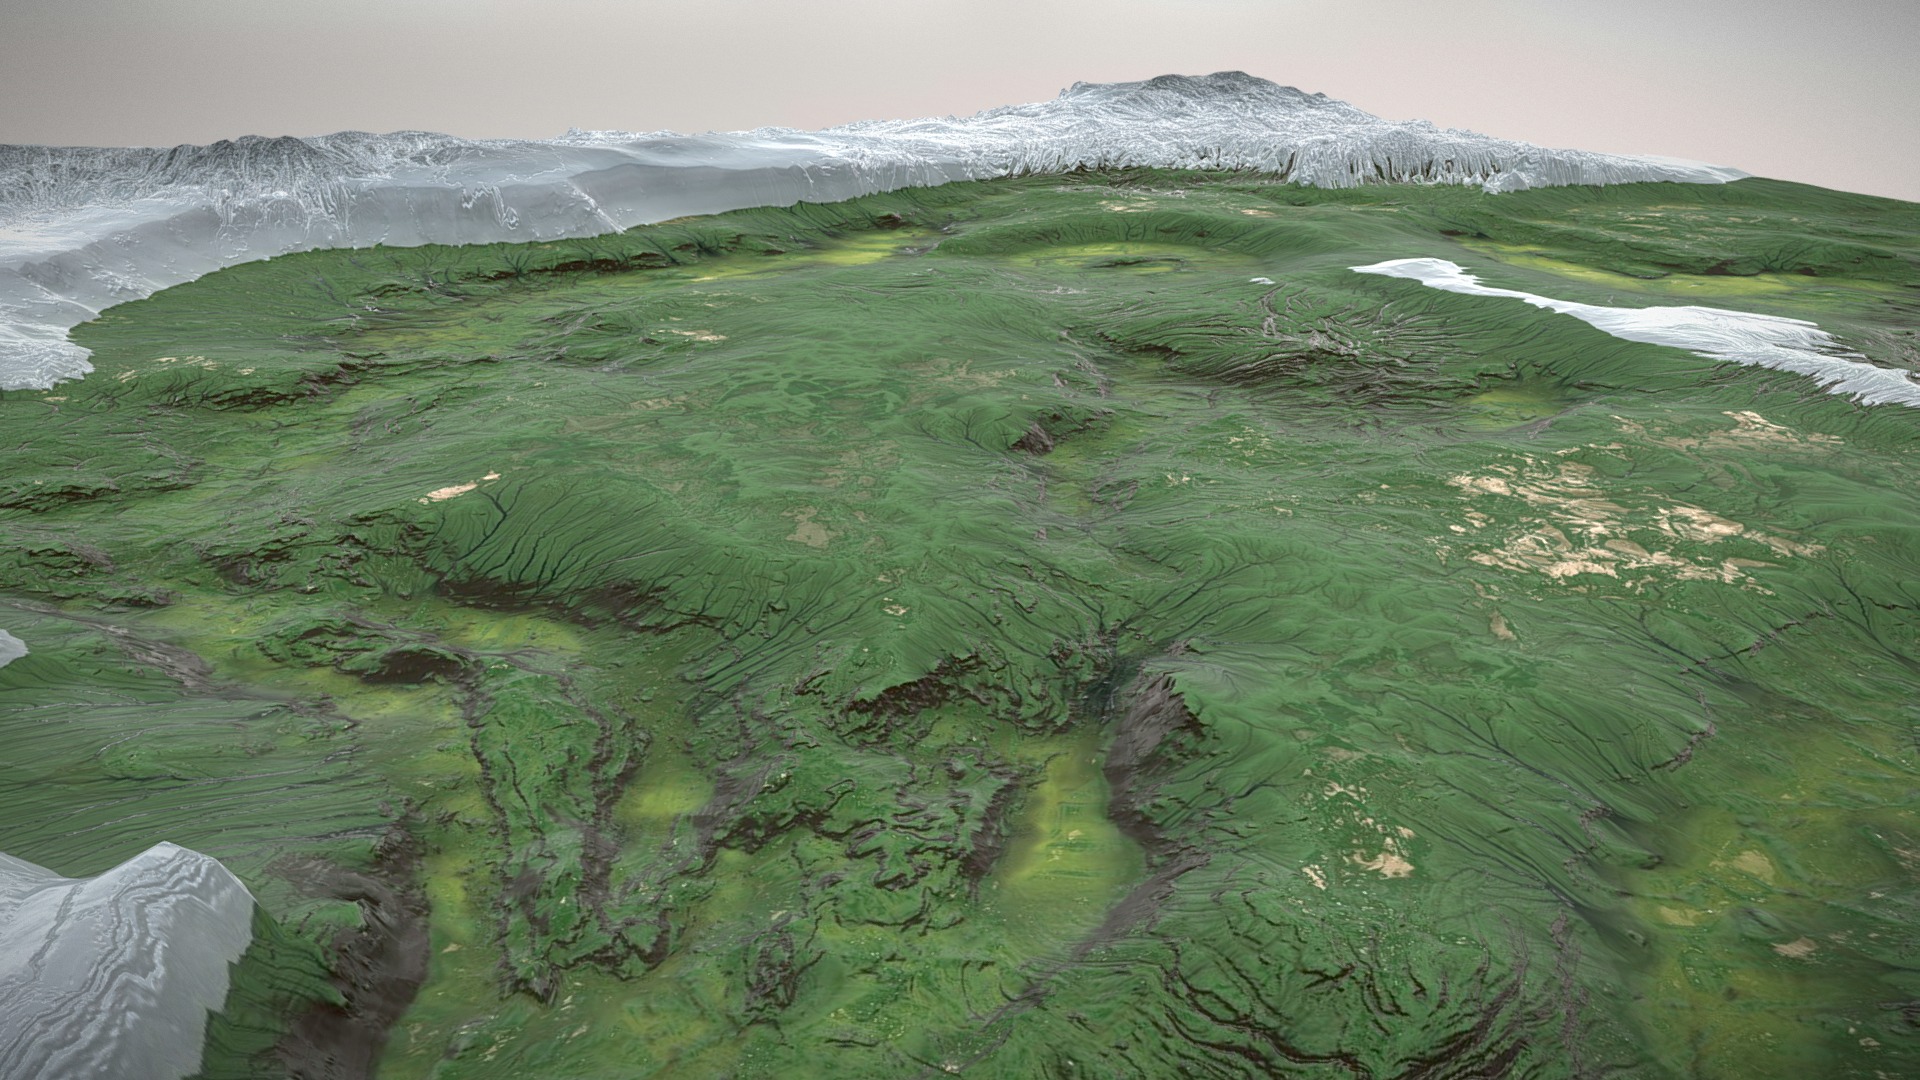 3D model terraforming - This is a 3D model of the terraforming. The 3D model is about a large body of water with green plants and a mountain in the background.